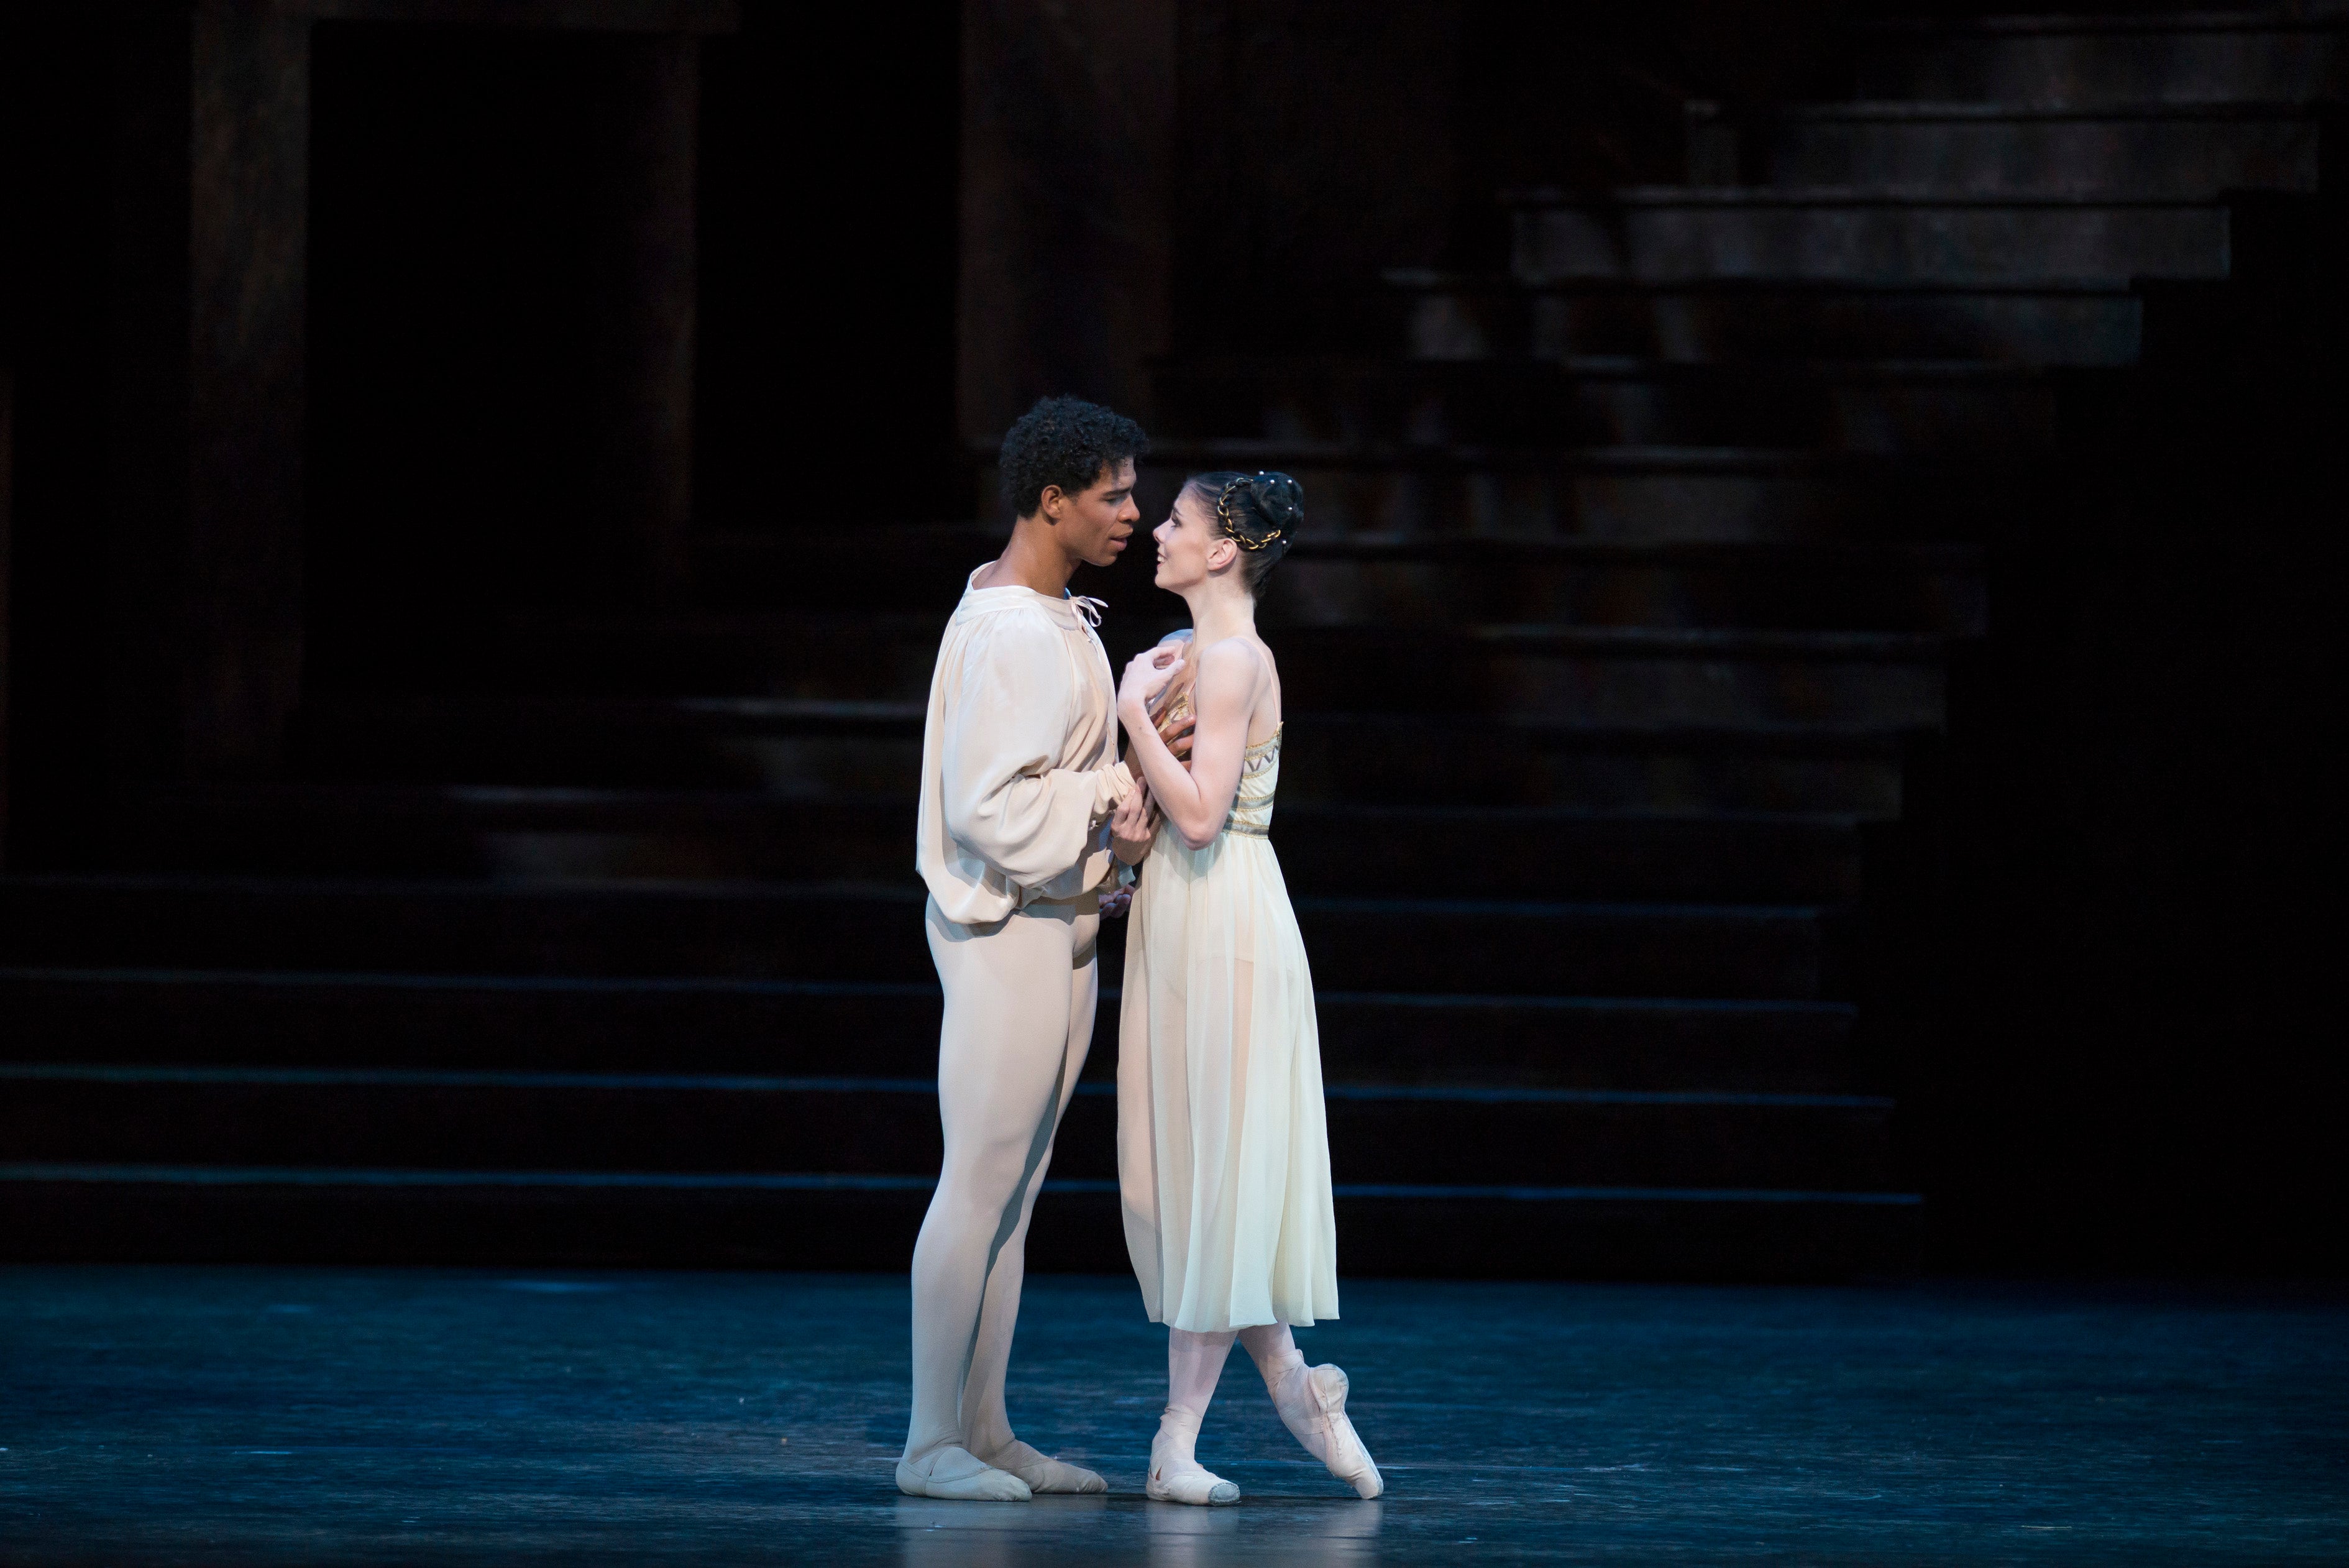 Acosta as Romeo and Natalia Osipova as Juliet in ‘Romeo and Juliet’ at the Royal Opera House in 2013